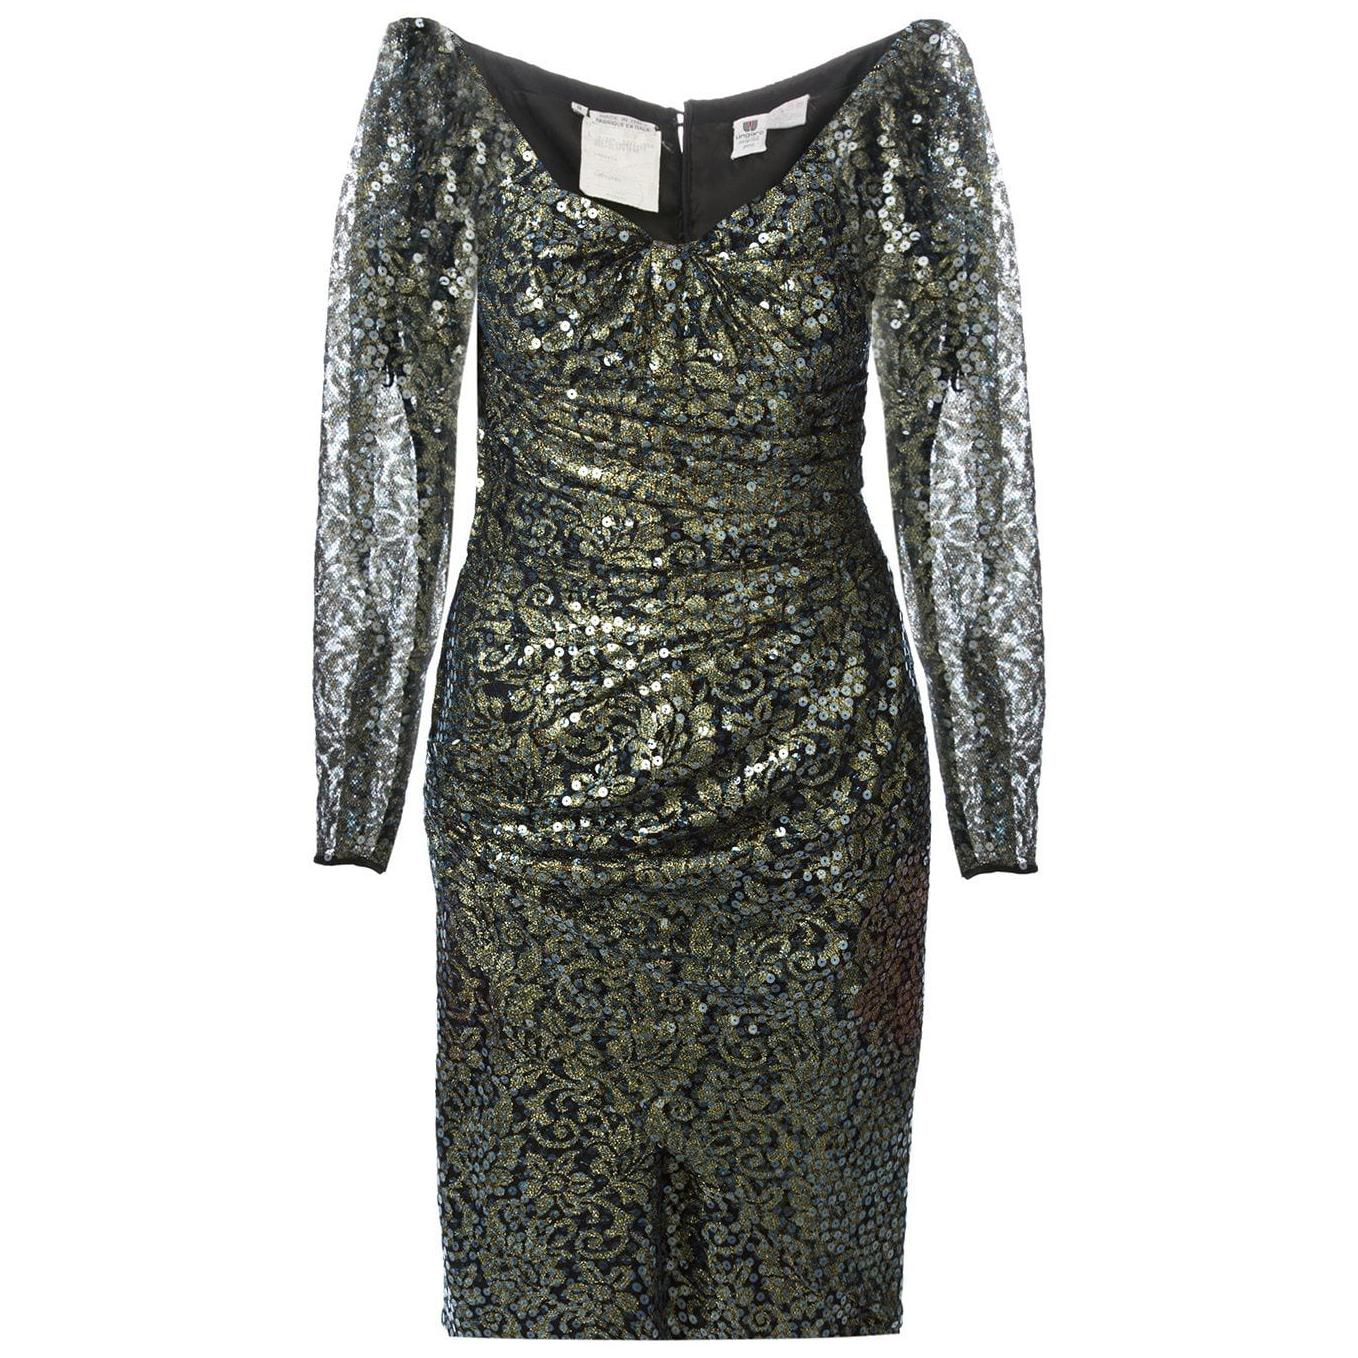 1990s Ungaro Black And Gold Lace Dress